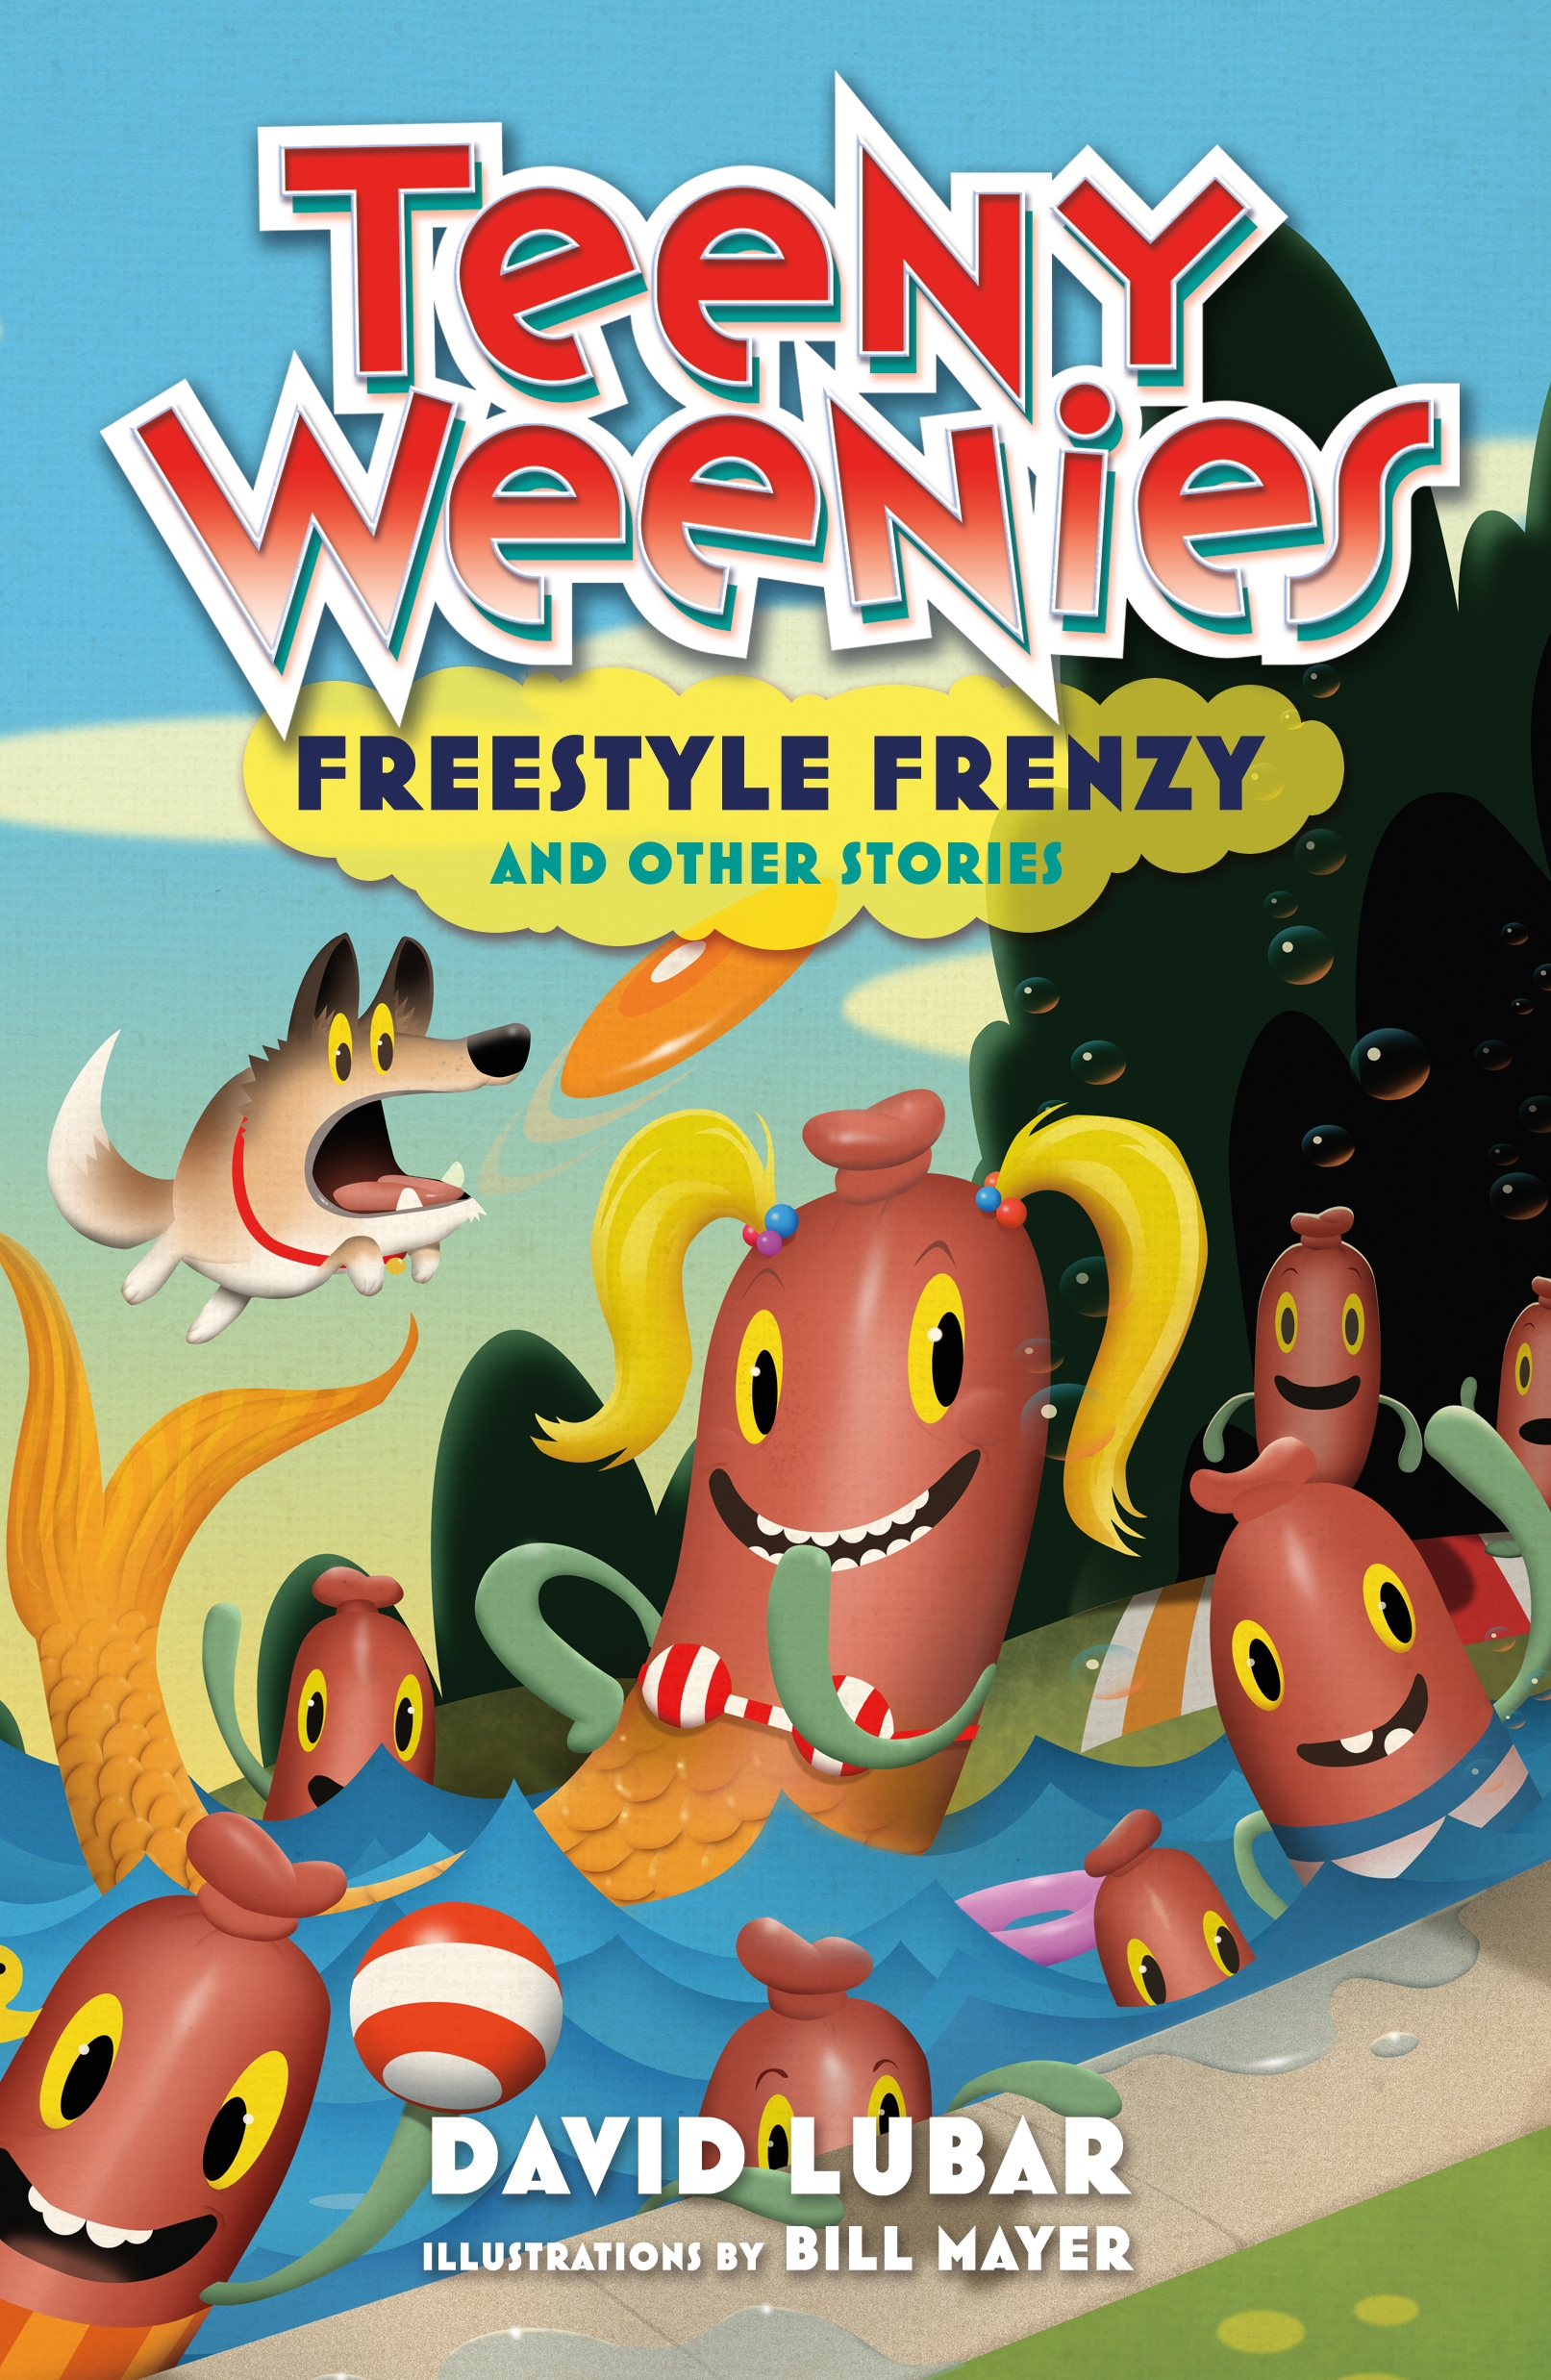 Teeny Weenies: Freestyle Frenzy : And Other Stories by David Lubar, Bill Mayer